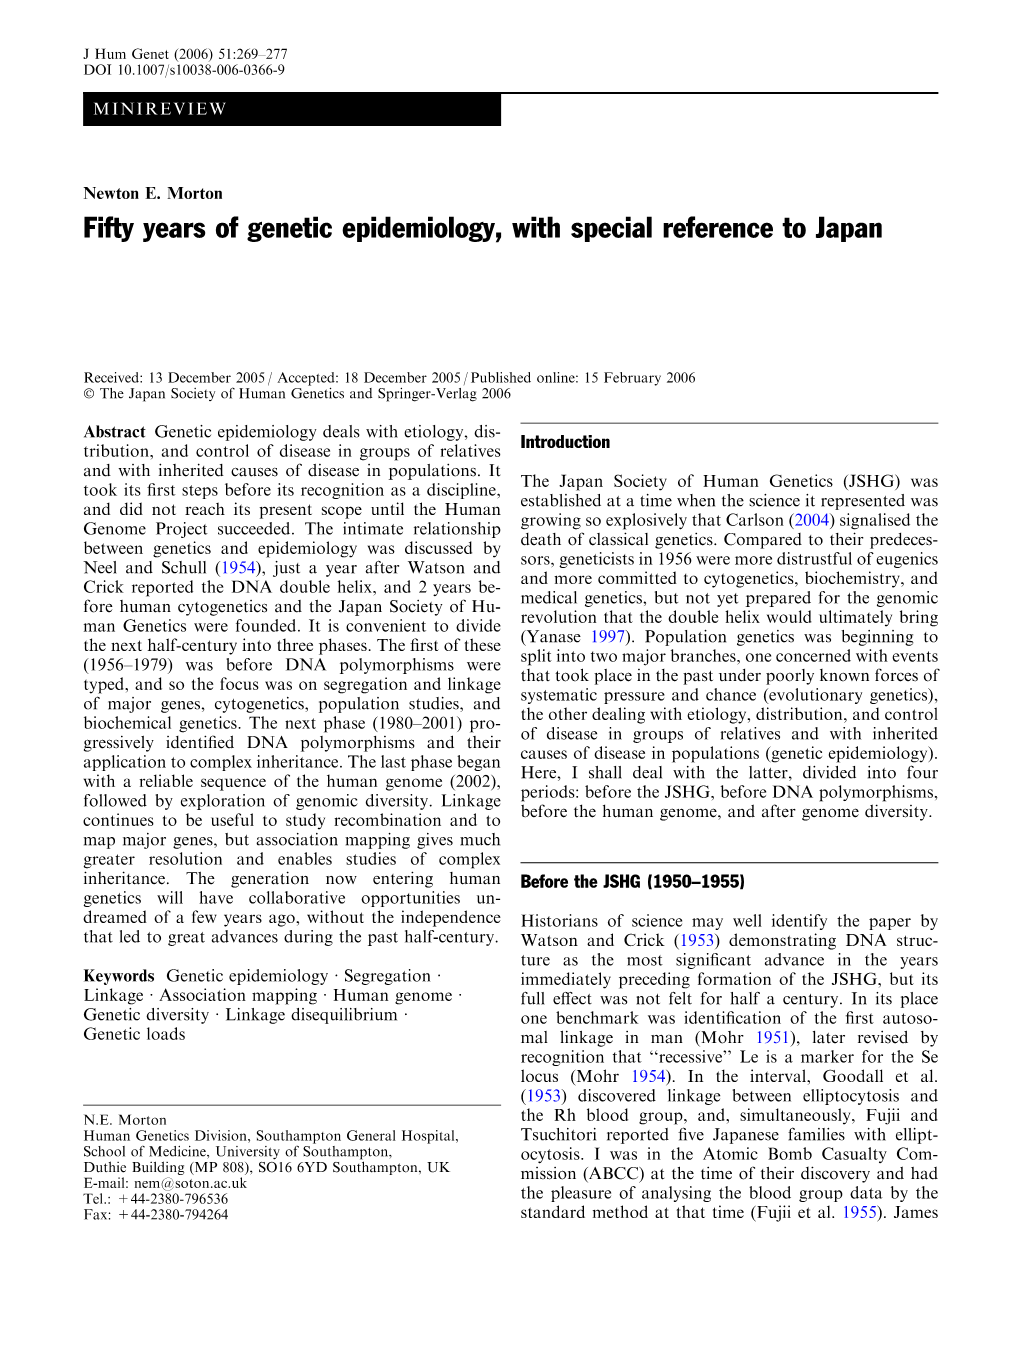 Fifty Years of Genetic Epidemiology, with Special Reference to Japan